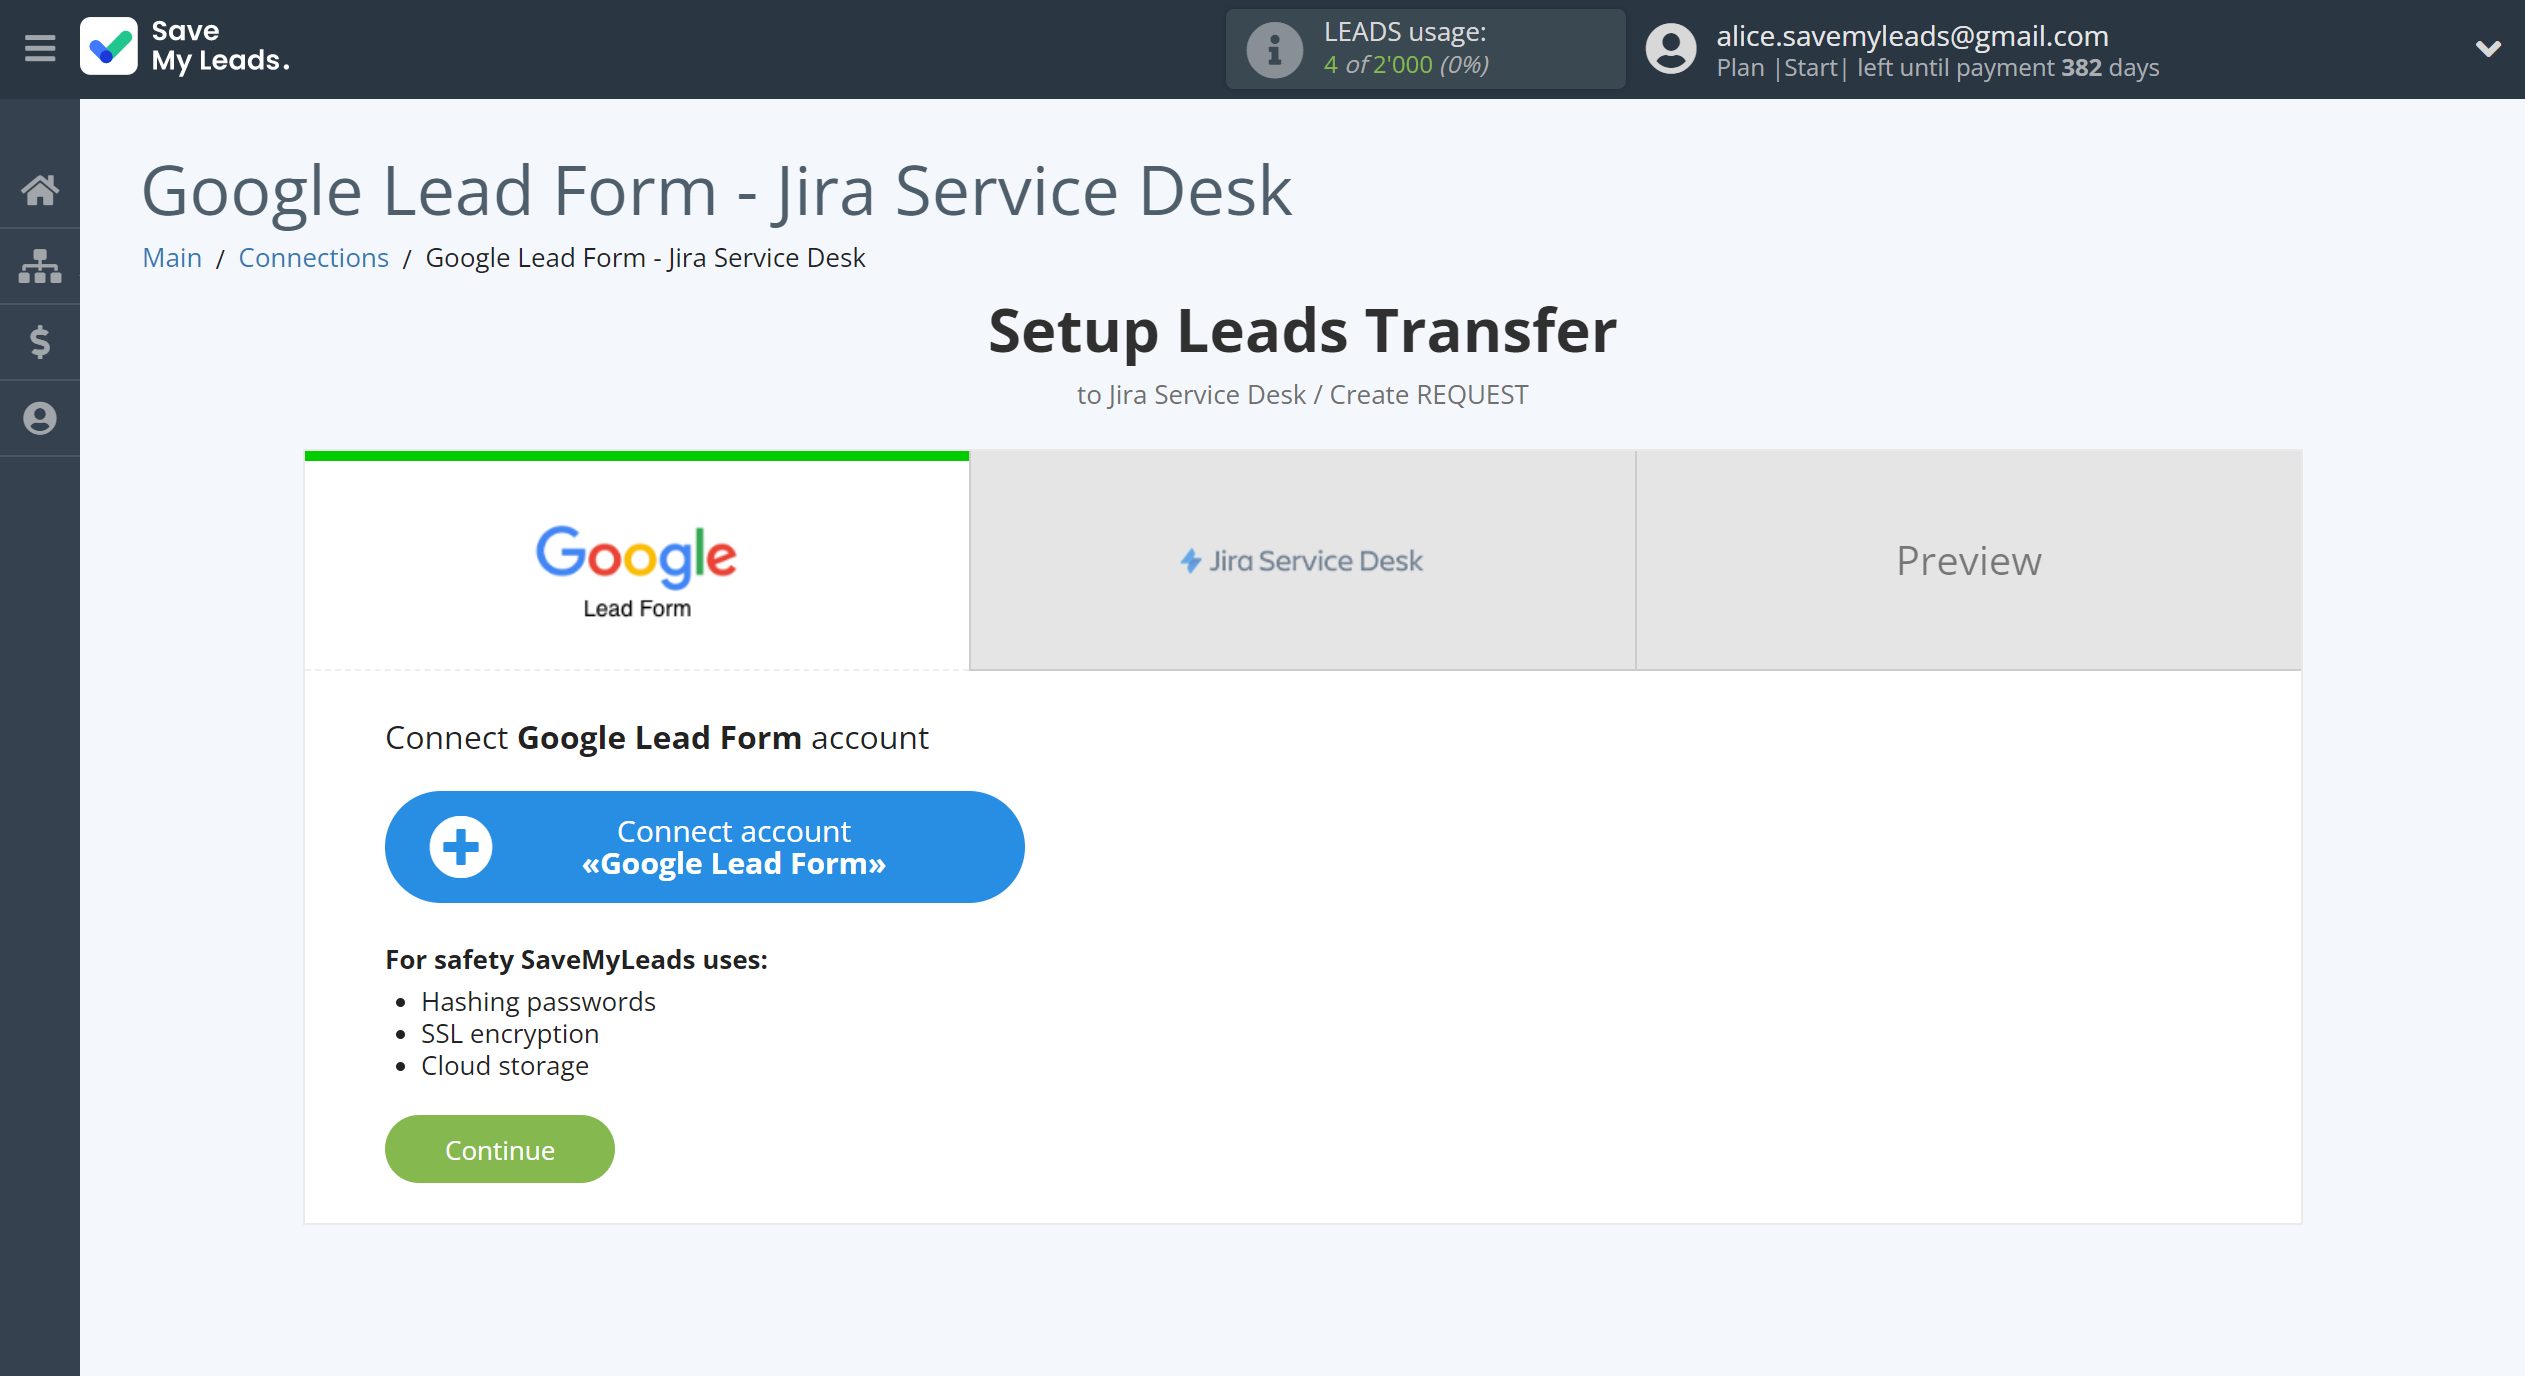 How to Connect Google Lead Form with Jira Service Desk | Data Source account connection